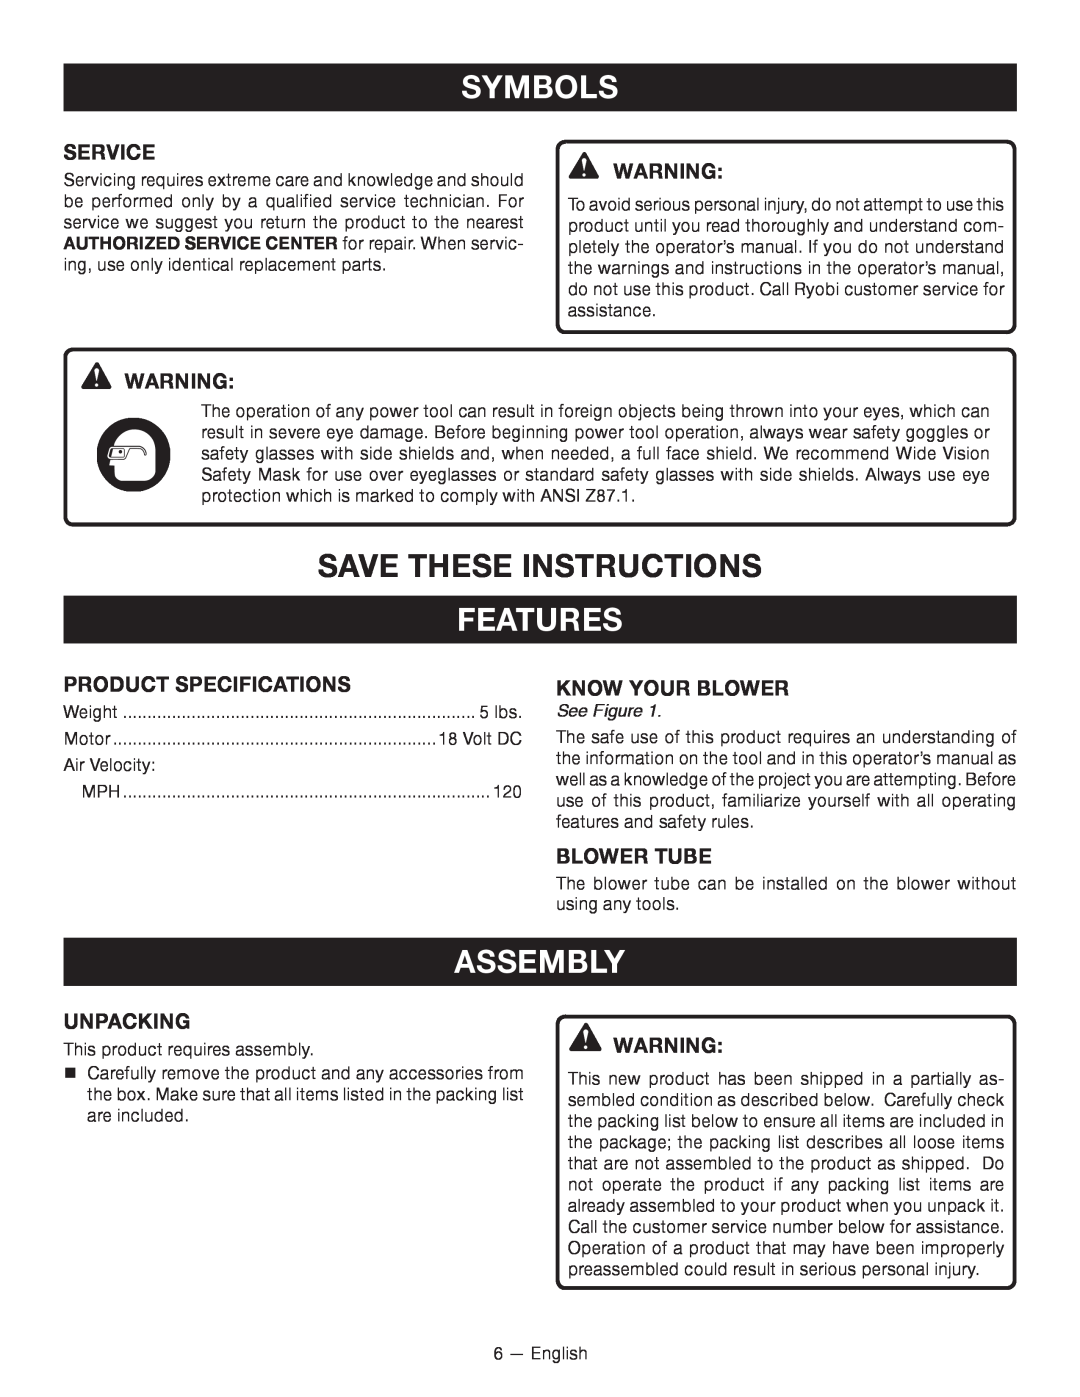 Ryobi P2101 Save These Instructions, Features, Assembly, Service, Product Specifications, KNOW YOUR blower, Blower Tube 